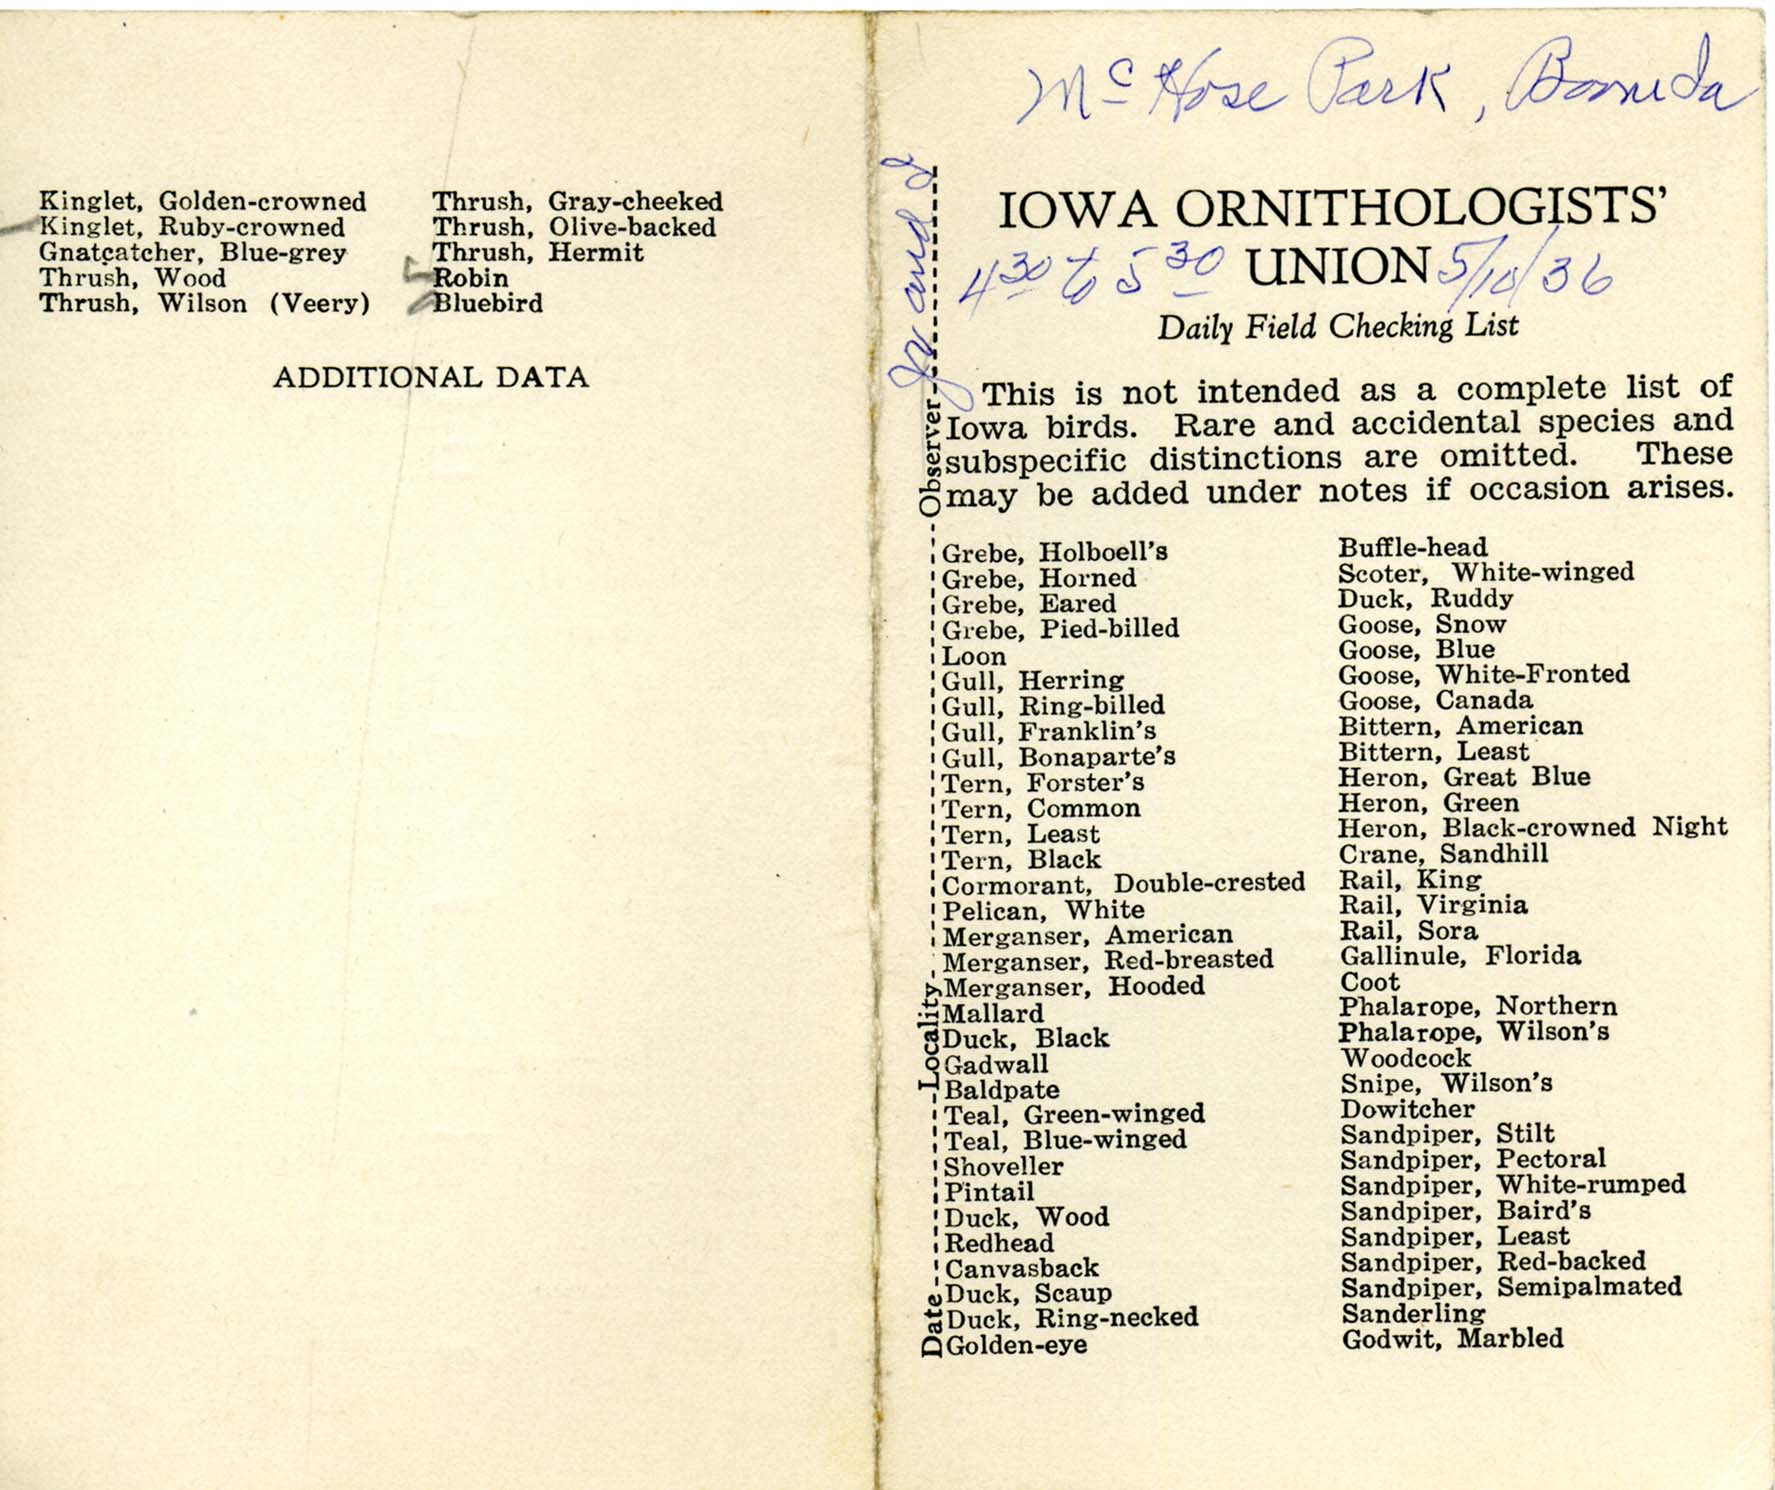 Daily field checking list by Walter Rosene, May 10, 1936